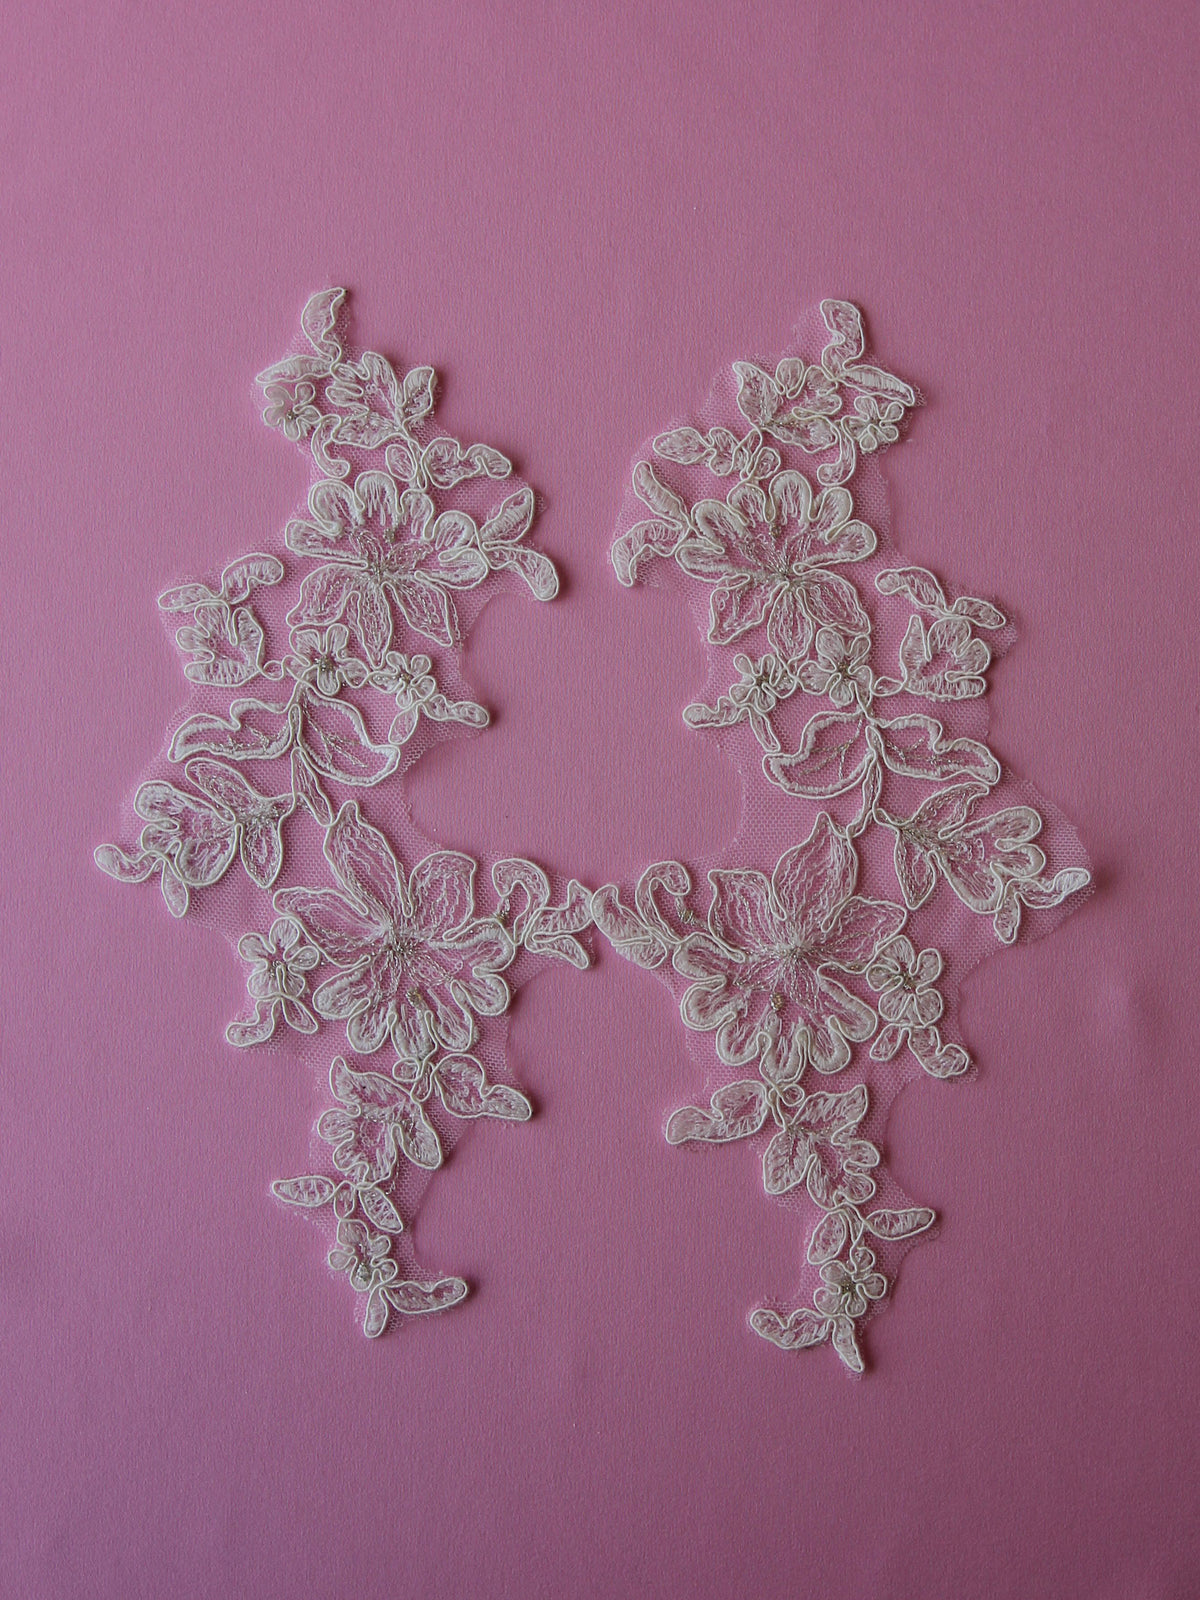 Ivory Corded Lace Appliques - Foxglove